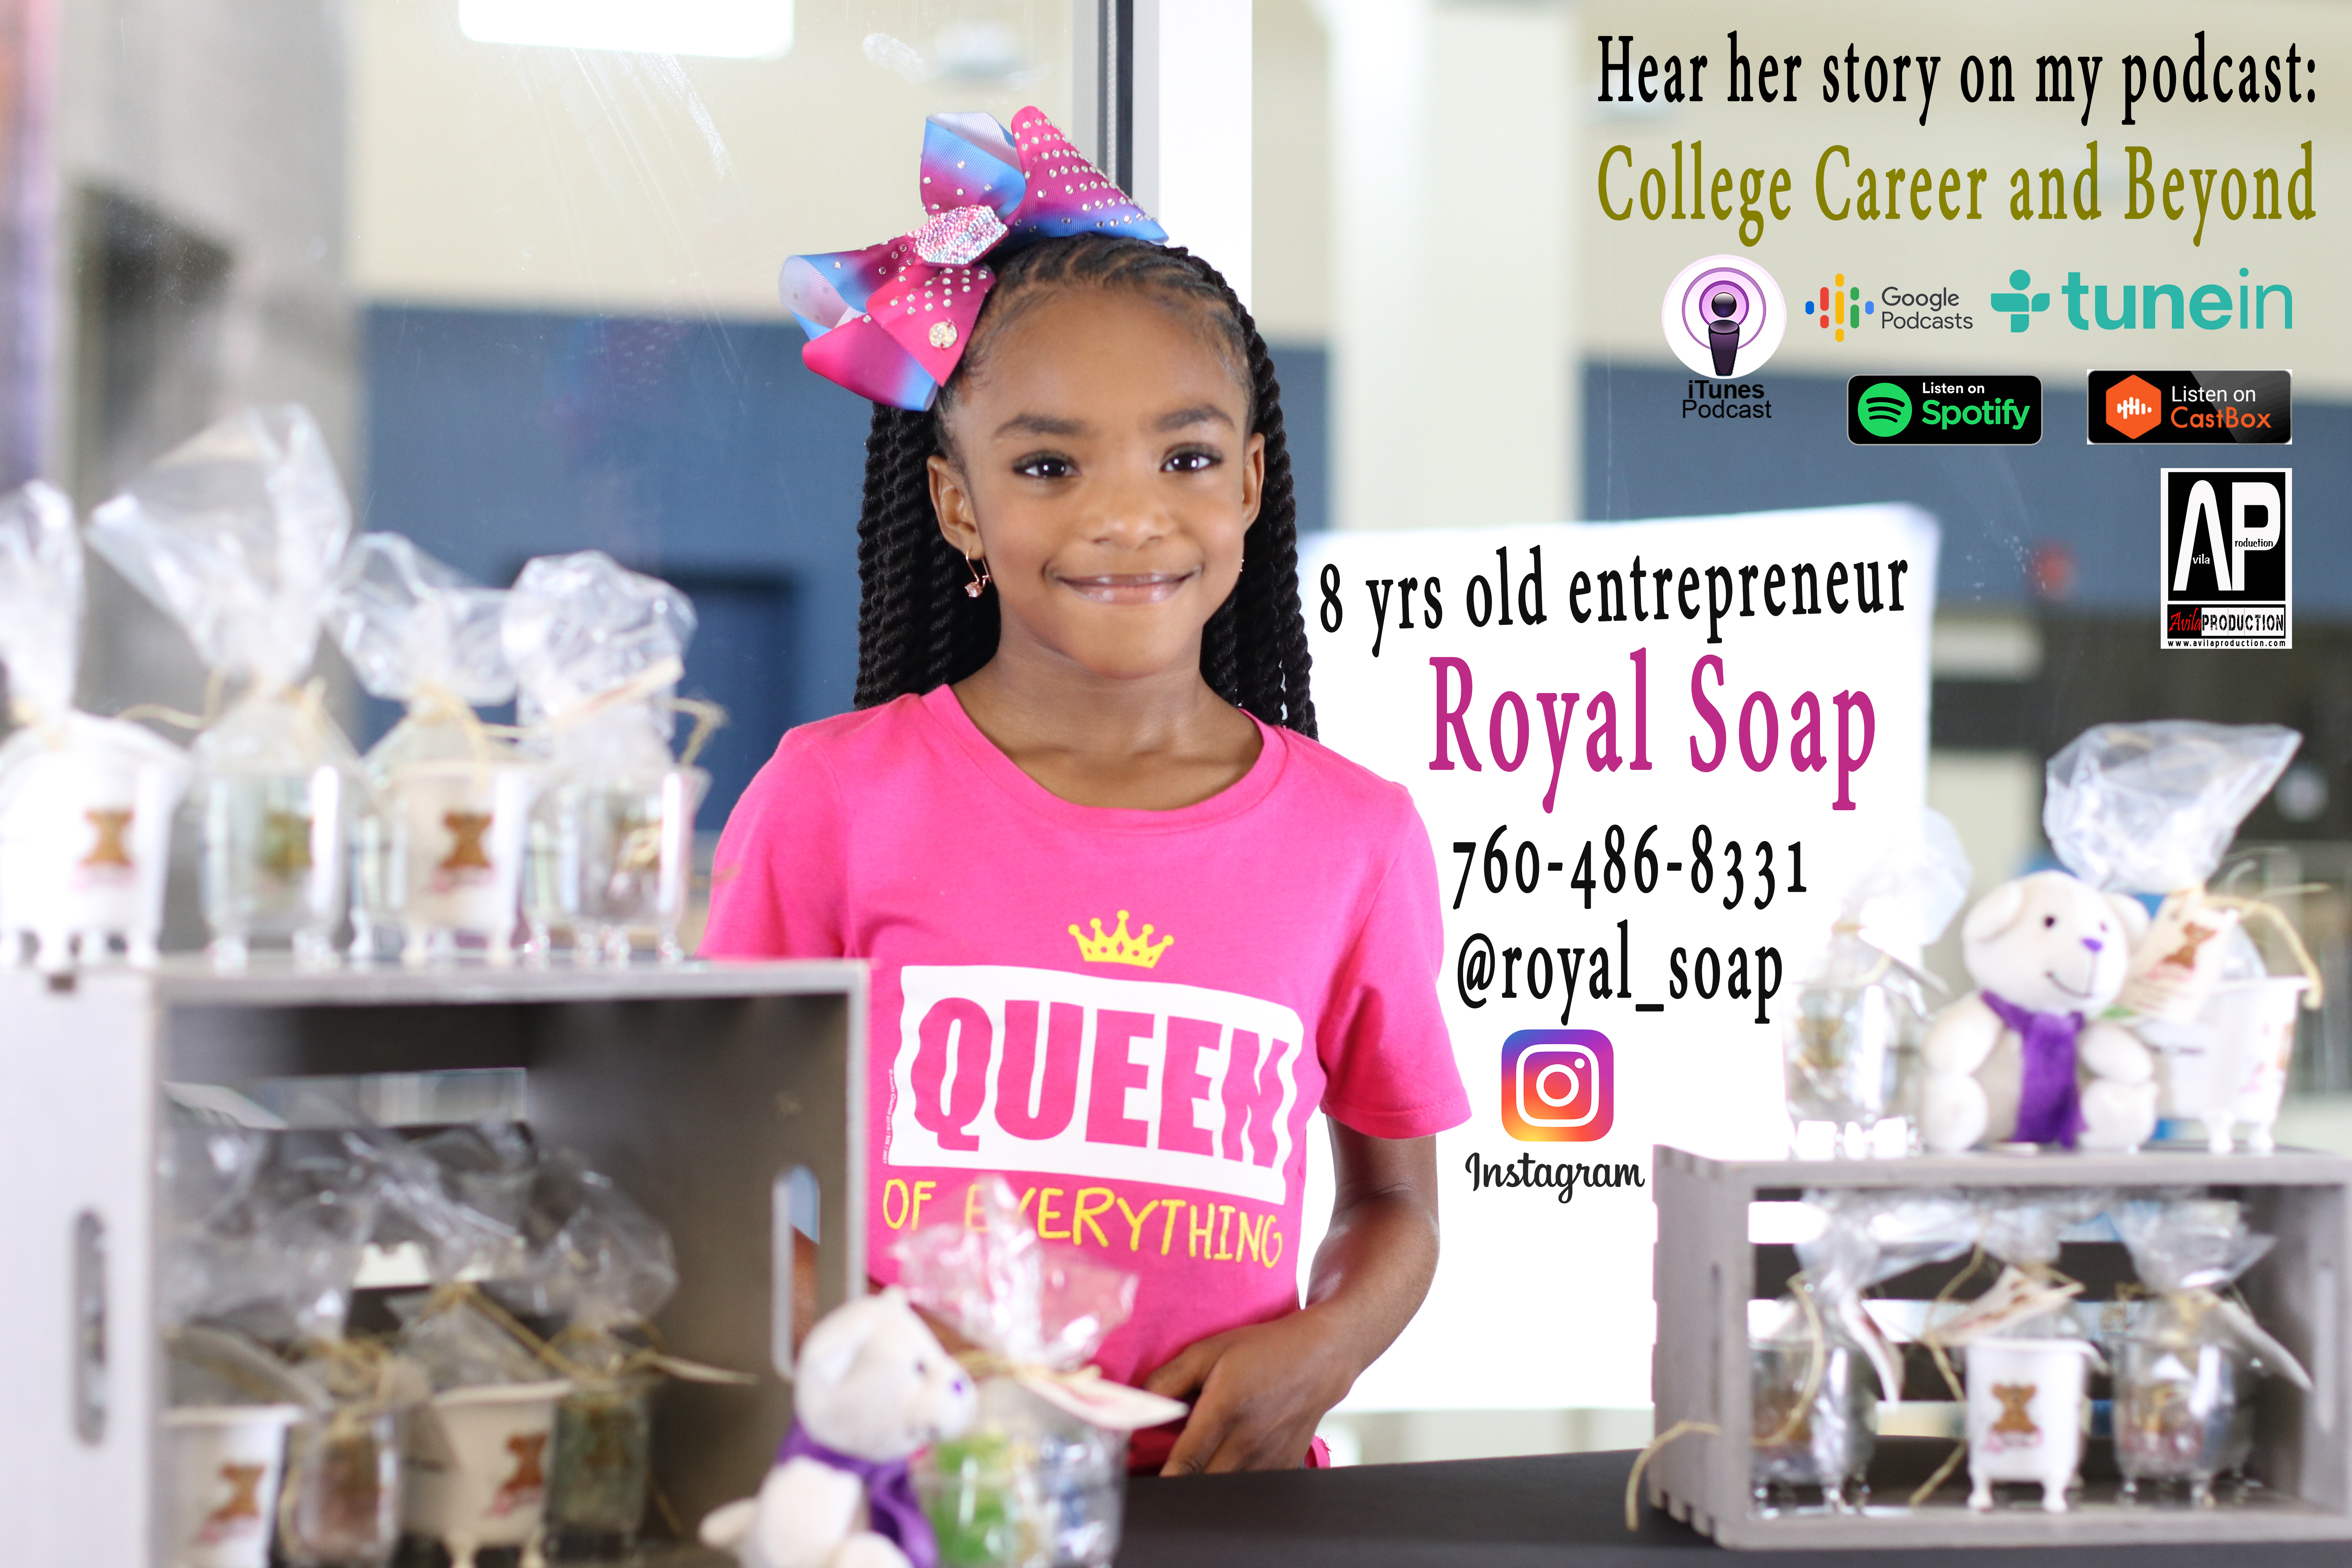 Meet an 8 yrs old entrepreneur who started her own soap company. She was inspired after the death of her father, who was shot in his car a couple weeks before Thanksgiving. Now her company raises revenue to help other children and families who have been victims of gun violence.